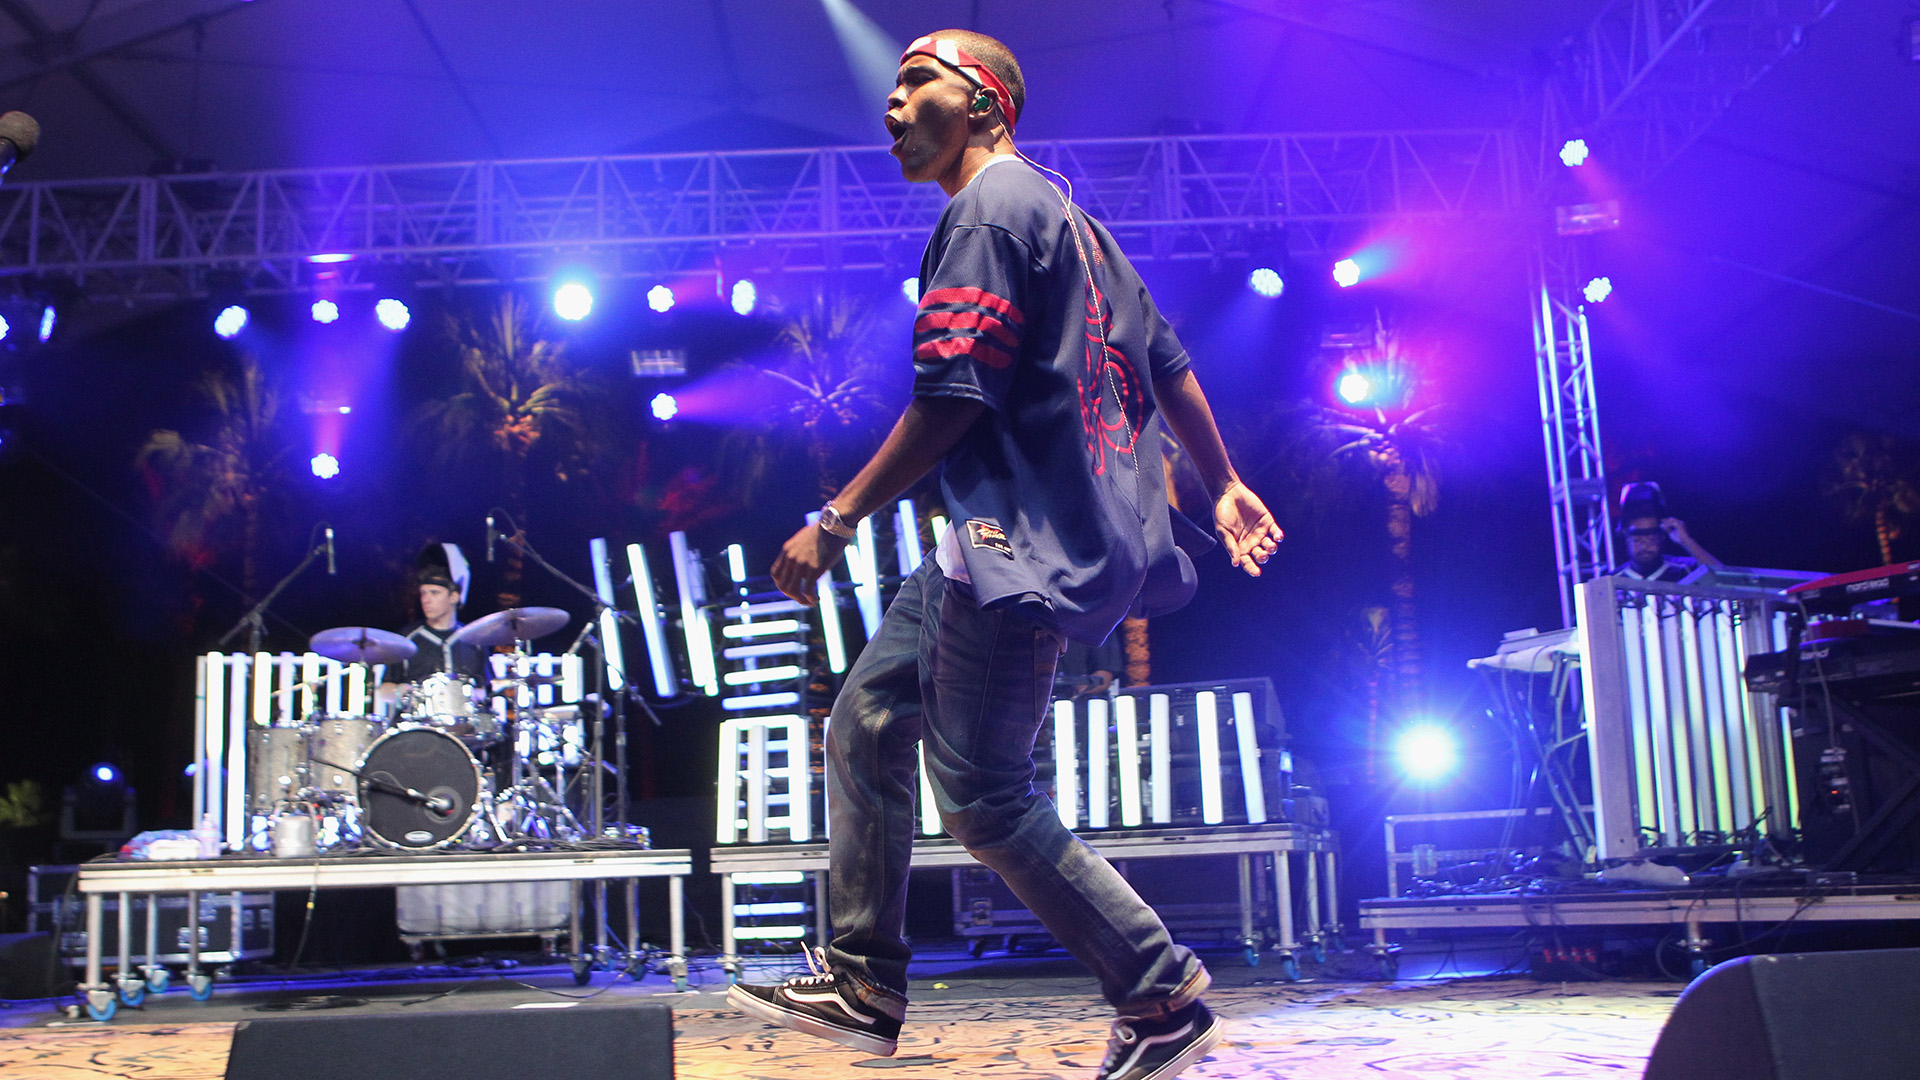 Singer Frank Ocean performs onstage at the 2012 Coachella Valley Music & Arts Festival held at The Empire Polo Field on April 13, 2012 in Indio, California.